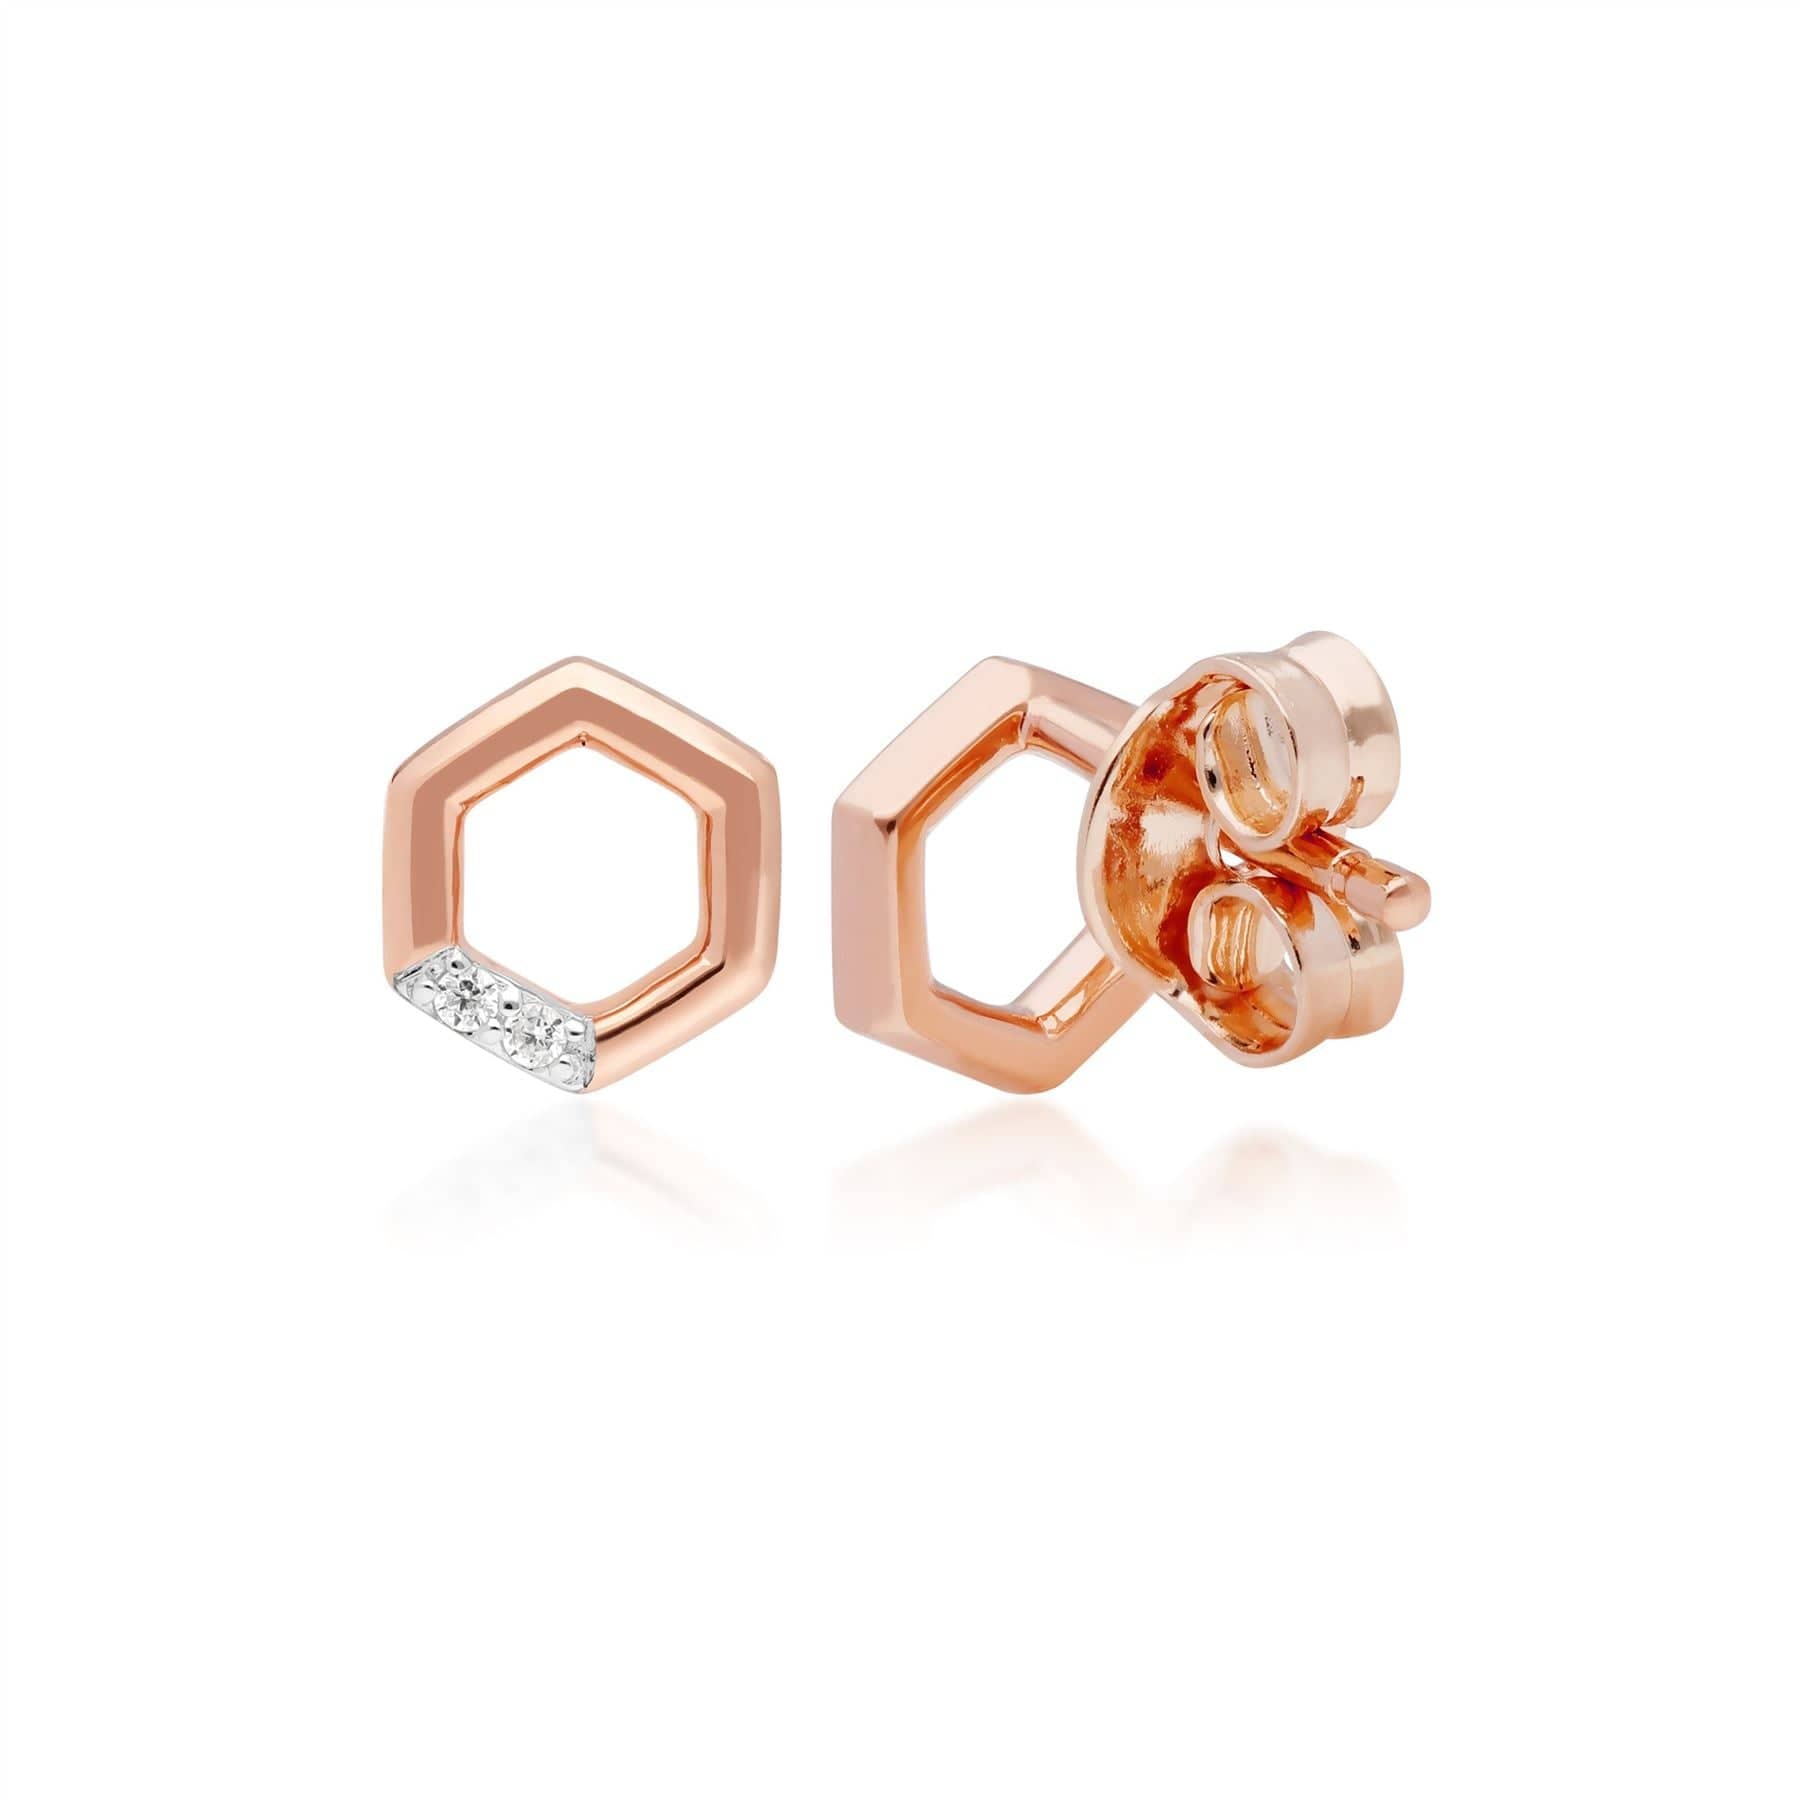 191E0400019 Diamond Pave Hexagon Stud Earrings in 9ct Rose Gold 2